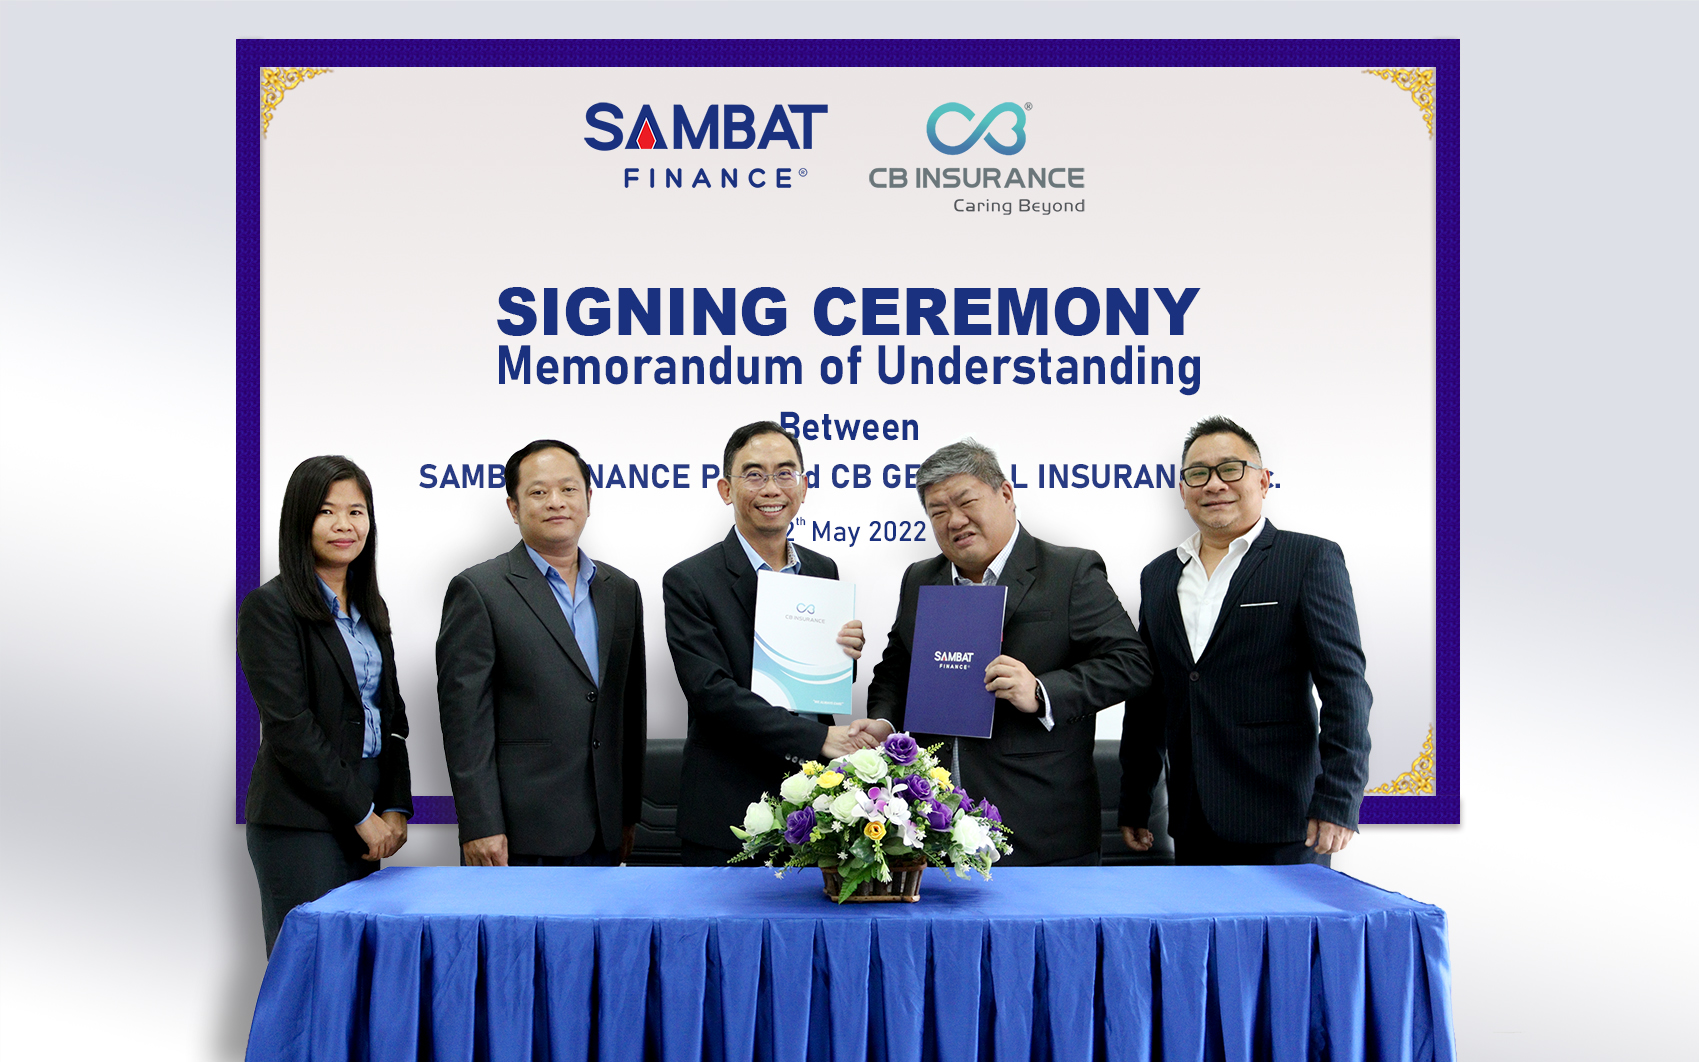 SAMBAT Finance signs MOU with CB General Insurance Plc for provision of insurance services